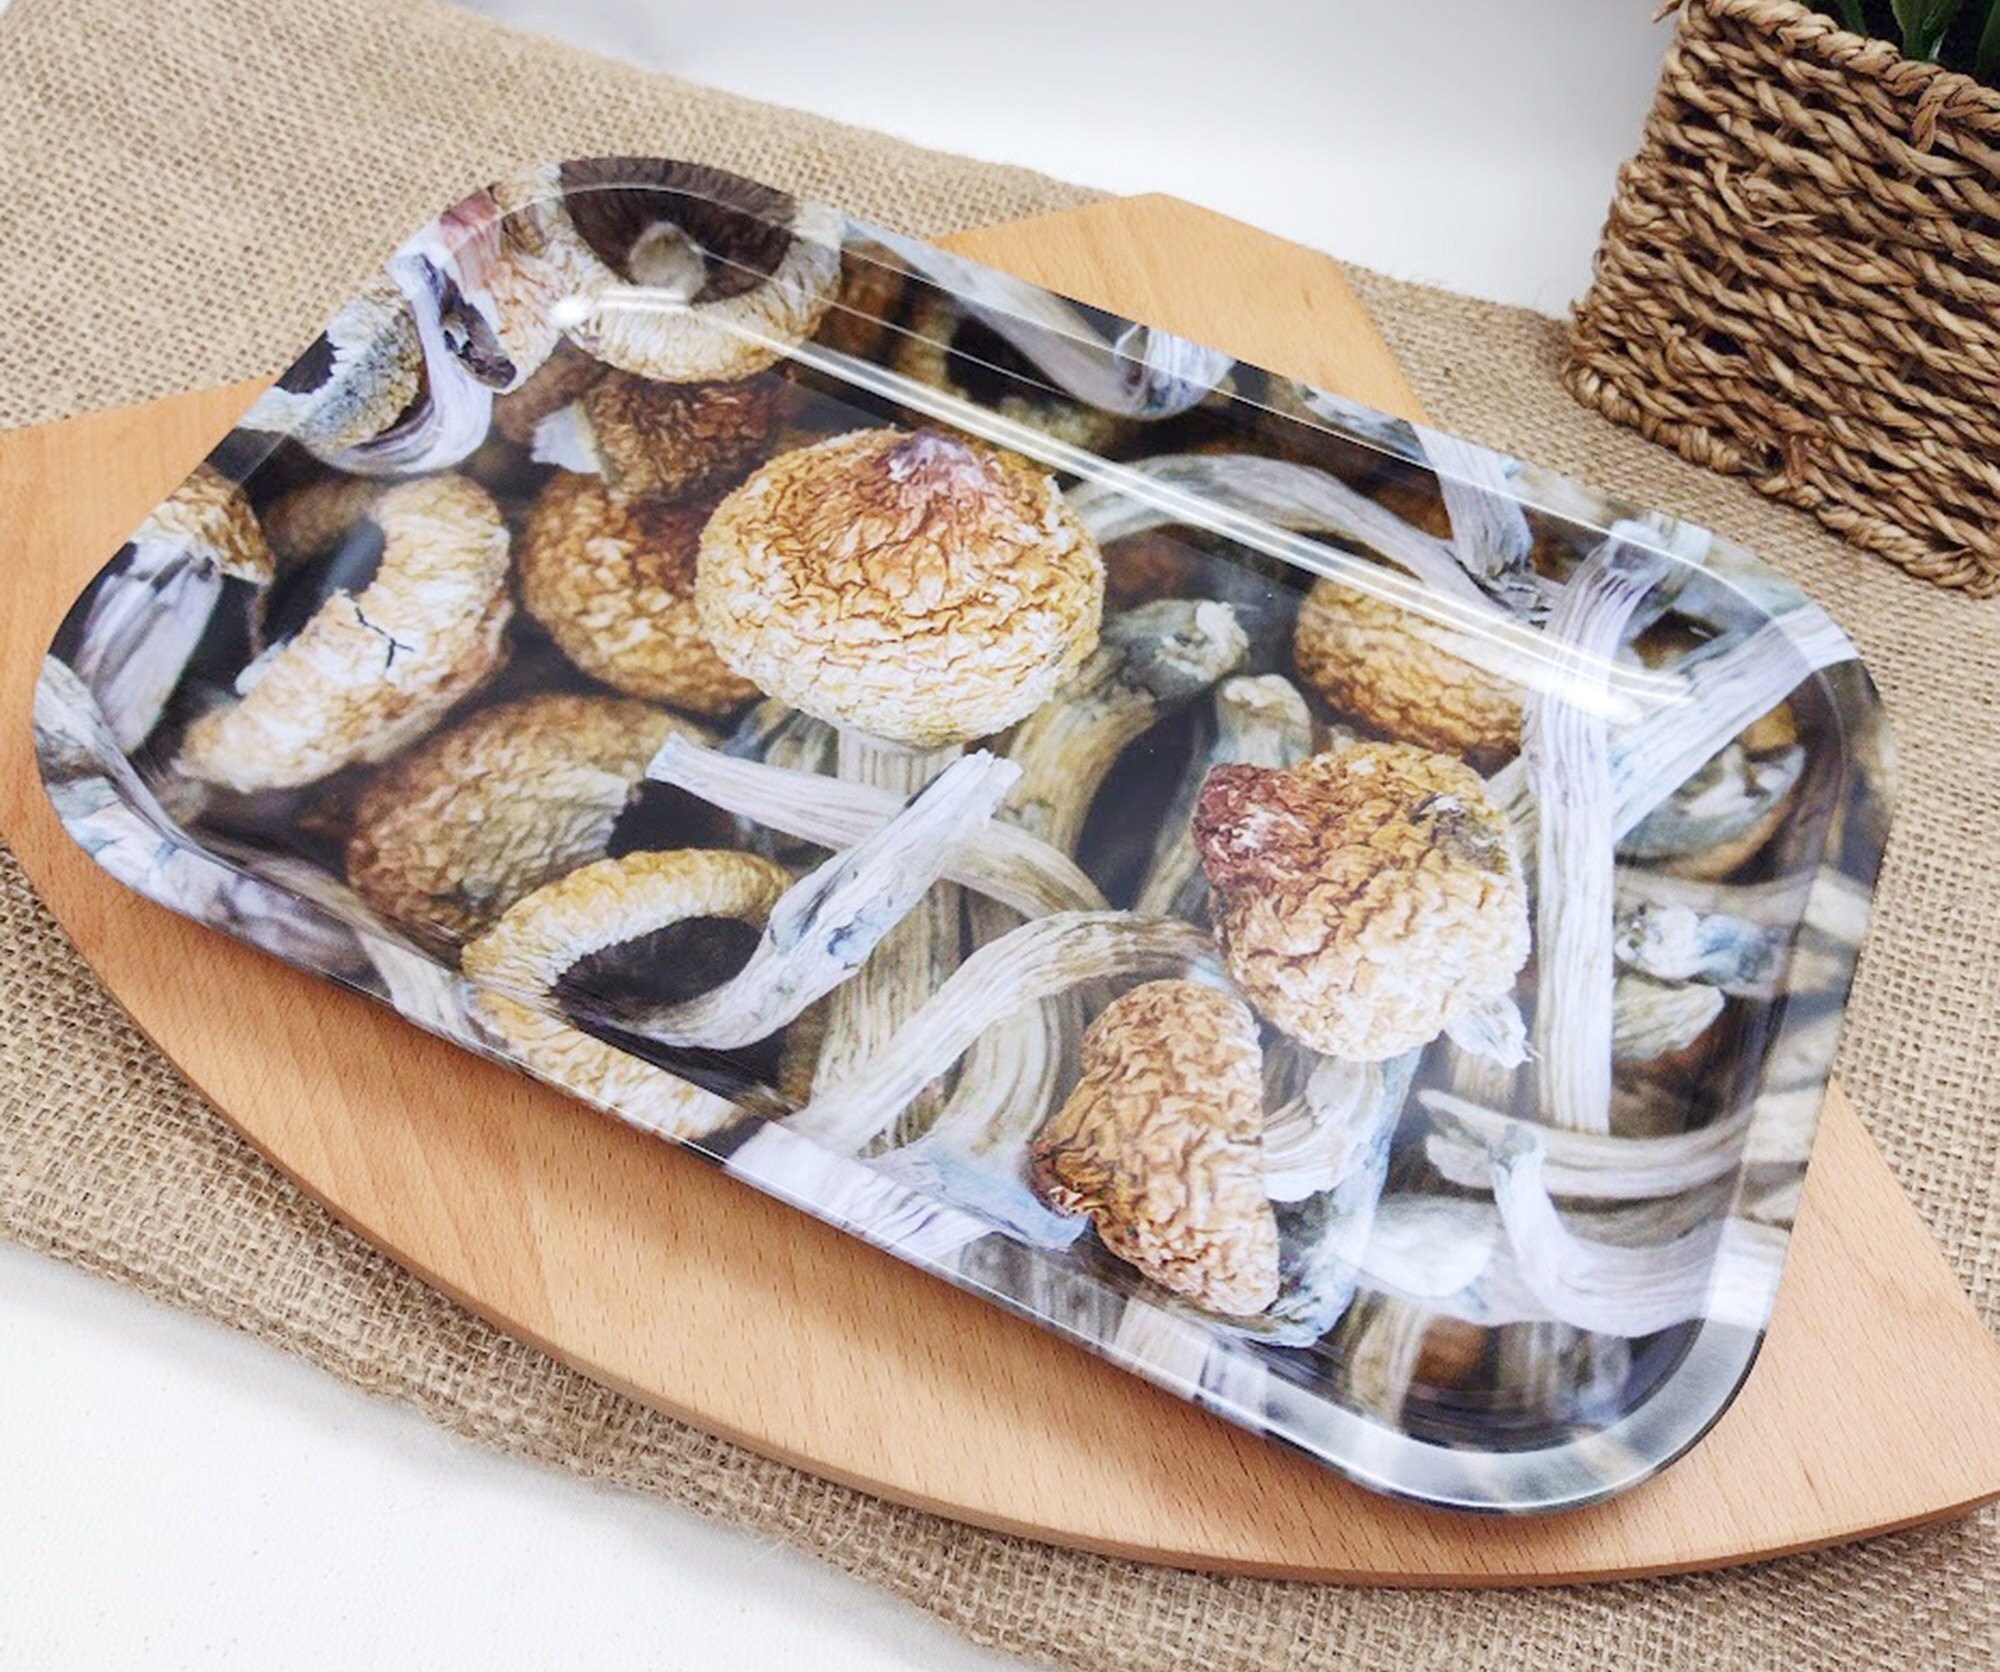 Holo Galaxy Lightning Vintage Glass Tray / MCM Vintage Snack Tray / Rolling  Tray / Resin Art on Glass / Feather and Mushroom / 